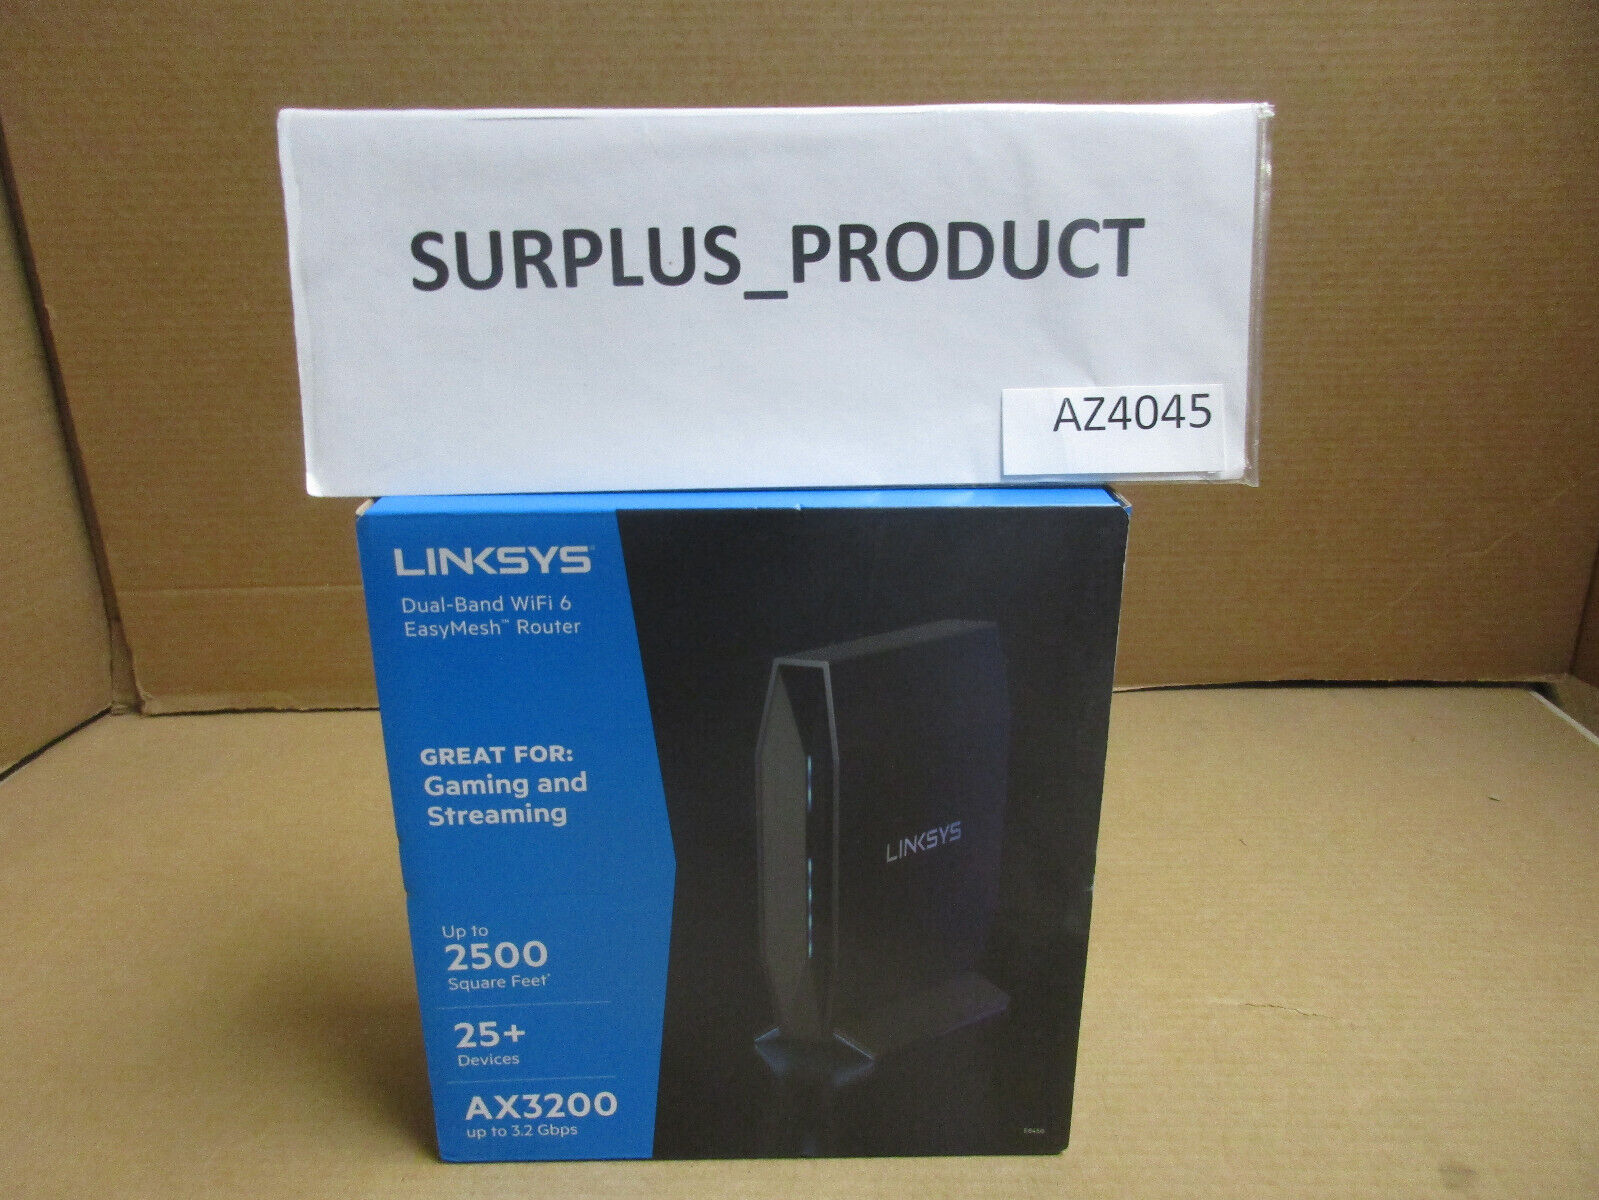 LINKSYS E8450,WIRELESS ROUTER, 4 PORT SWITCH, GIGE, WI-FI 6, DUAL BAND, OPEN BOX